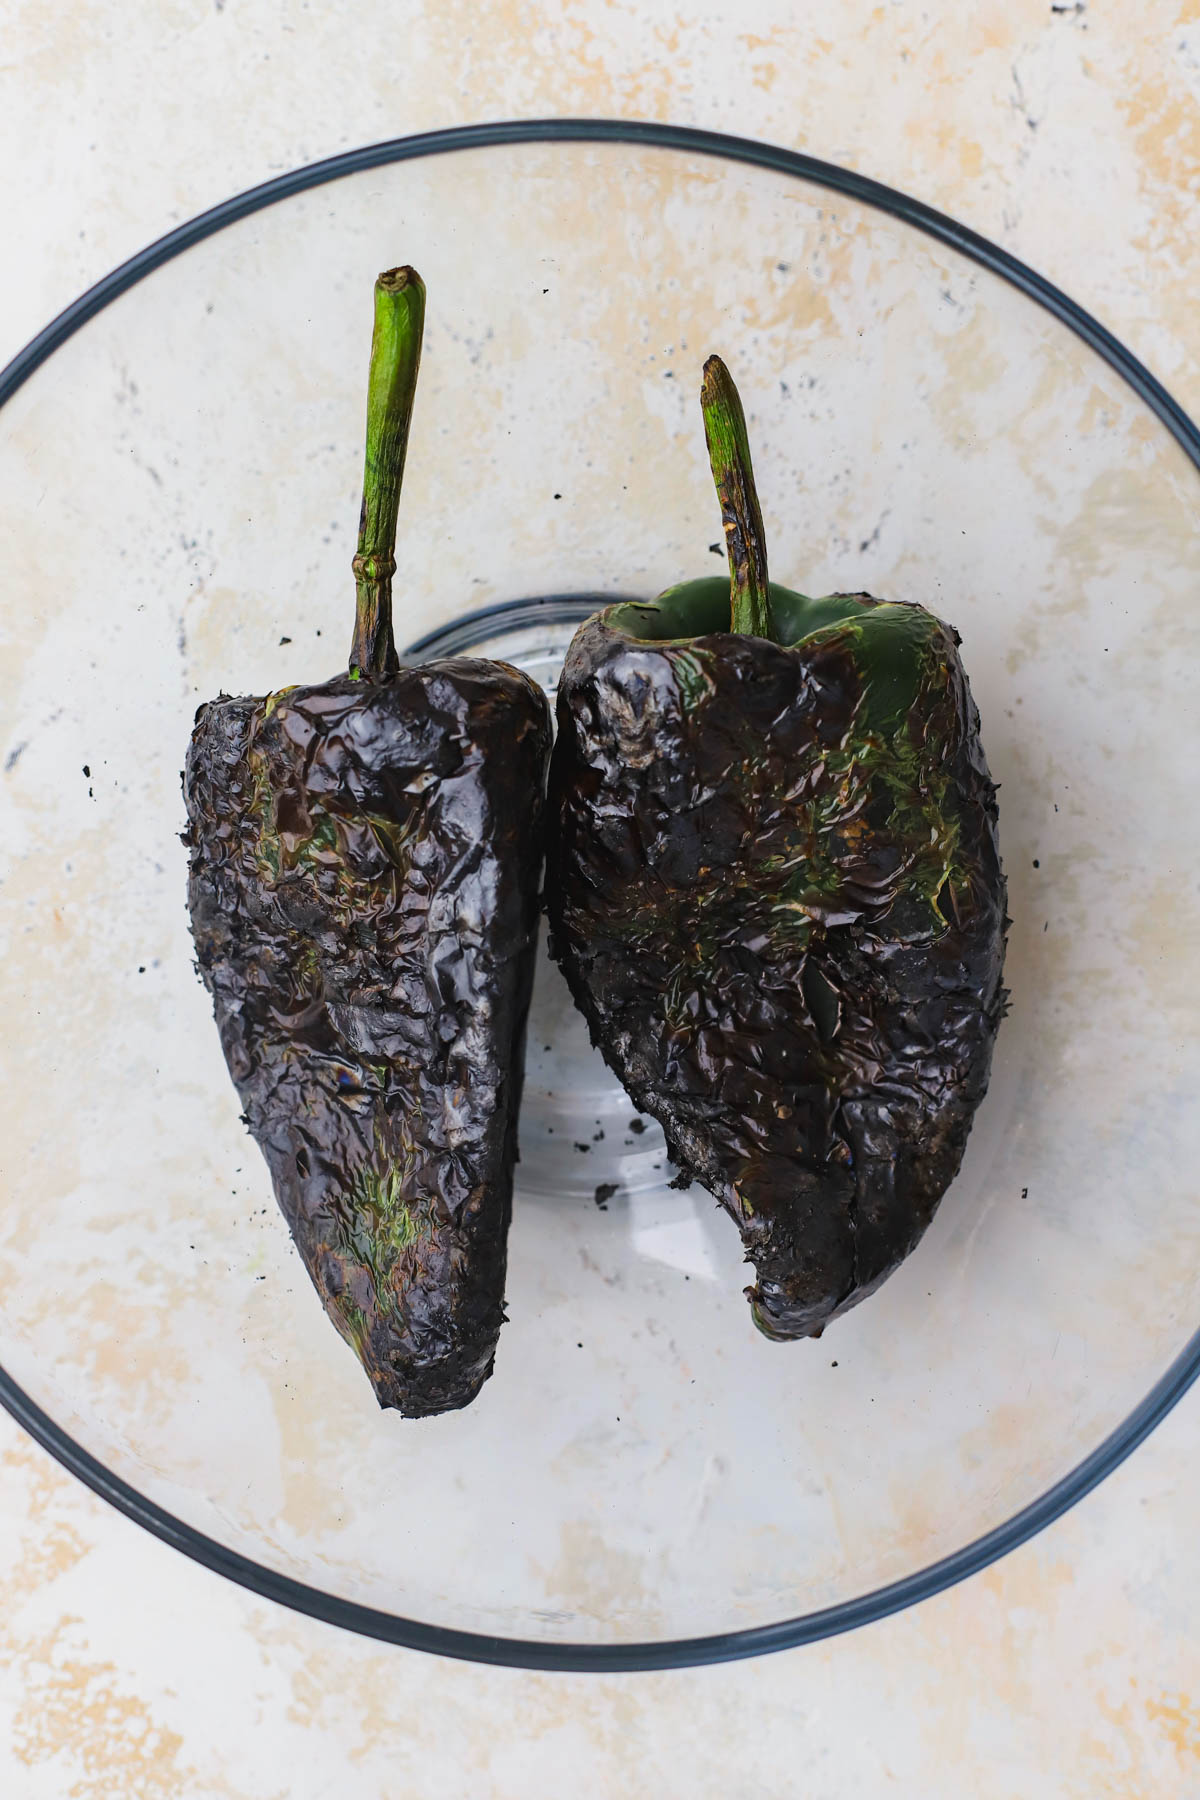 Charred poblano peppers. 